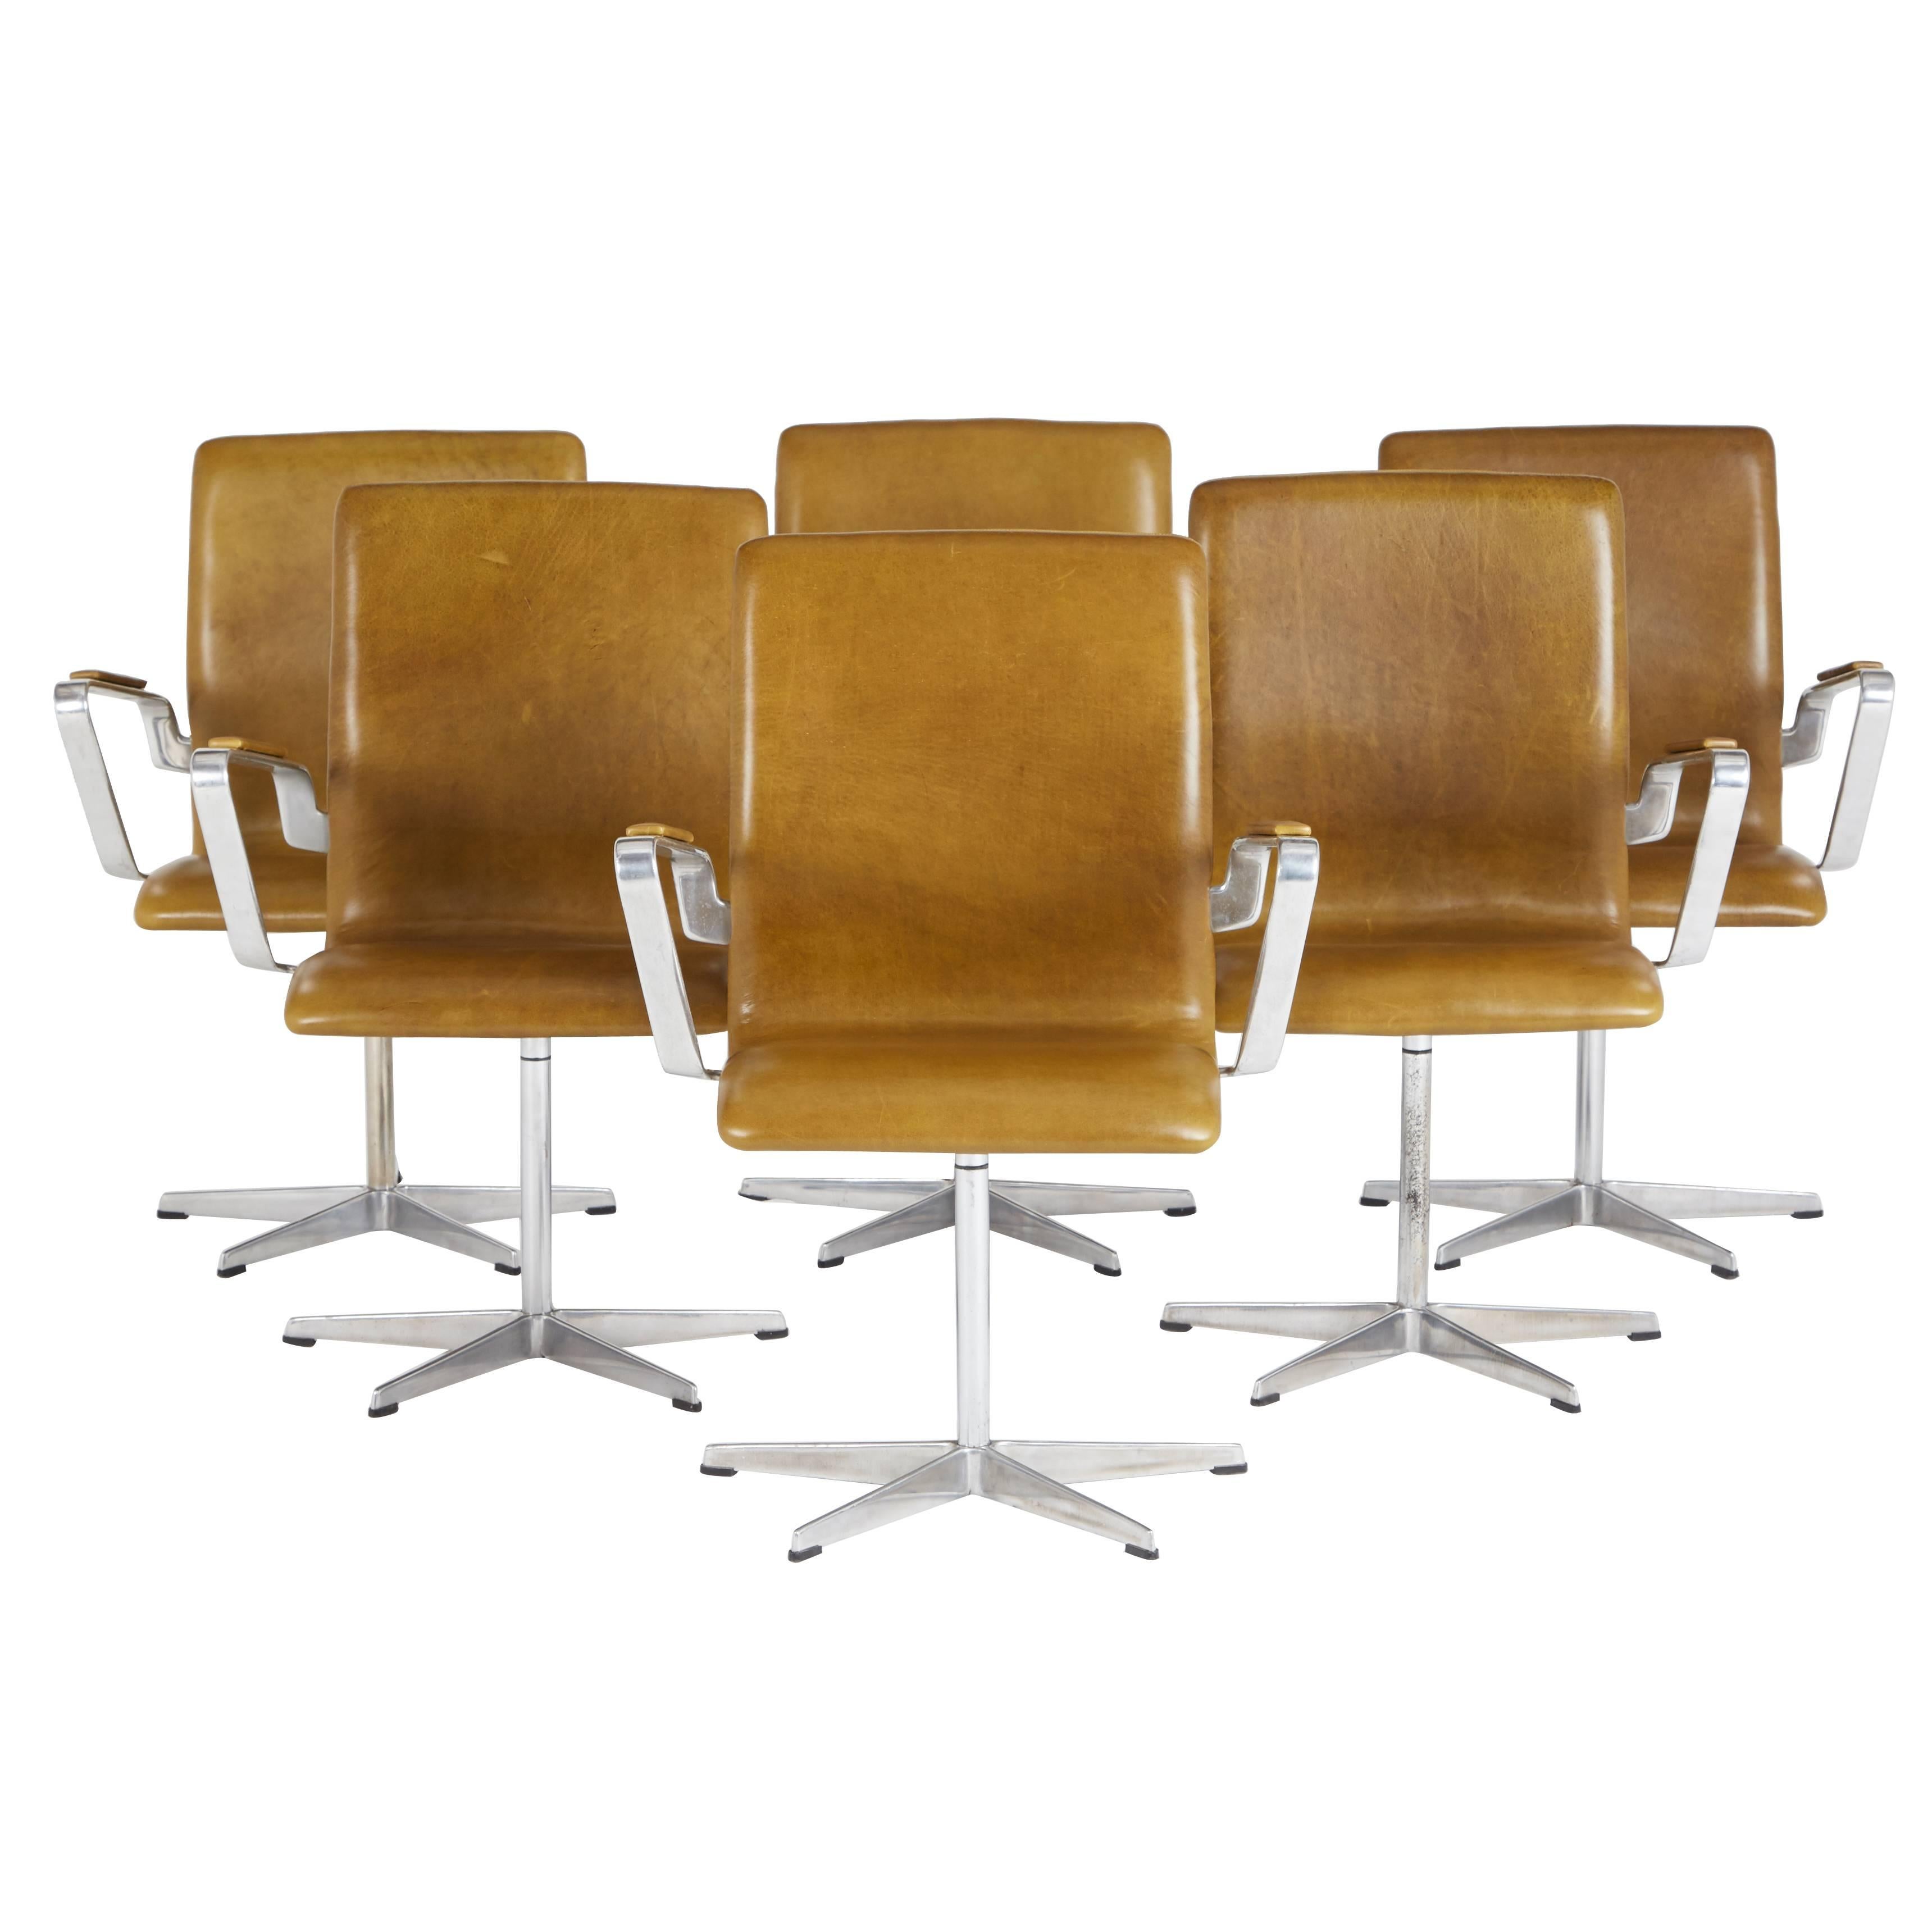 Leather Oxford Swivel Chairs by Arne Jacobsen for Fritz Hansen, 1973, Signed 1